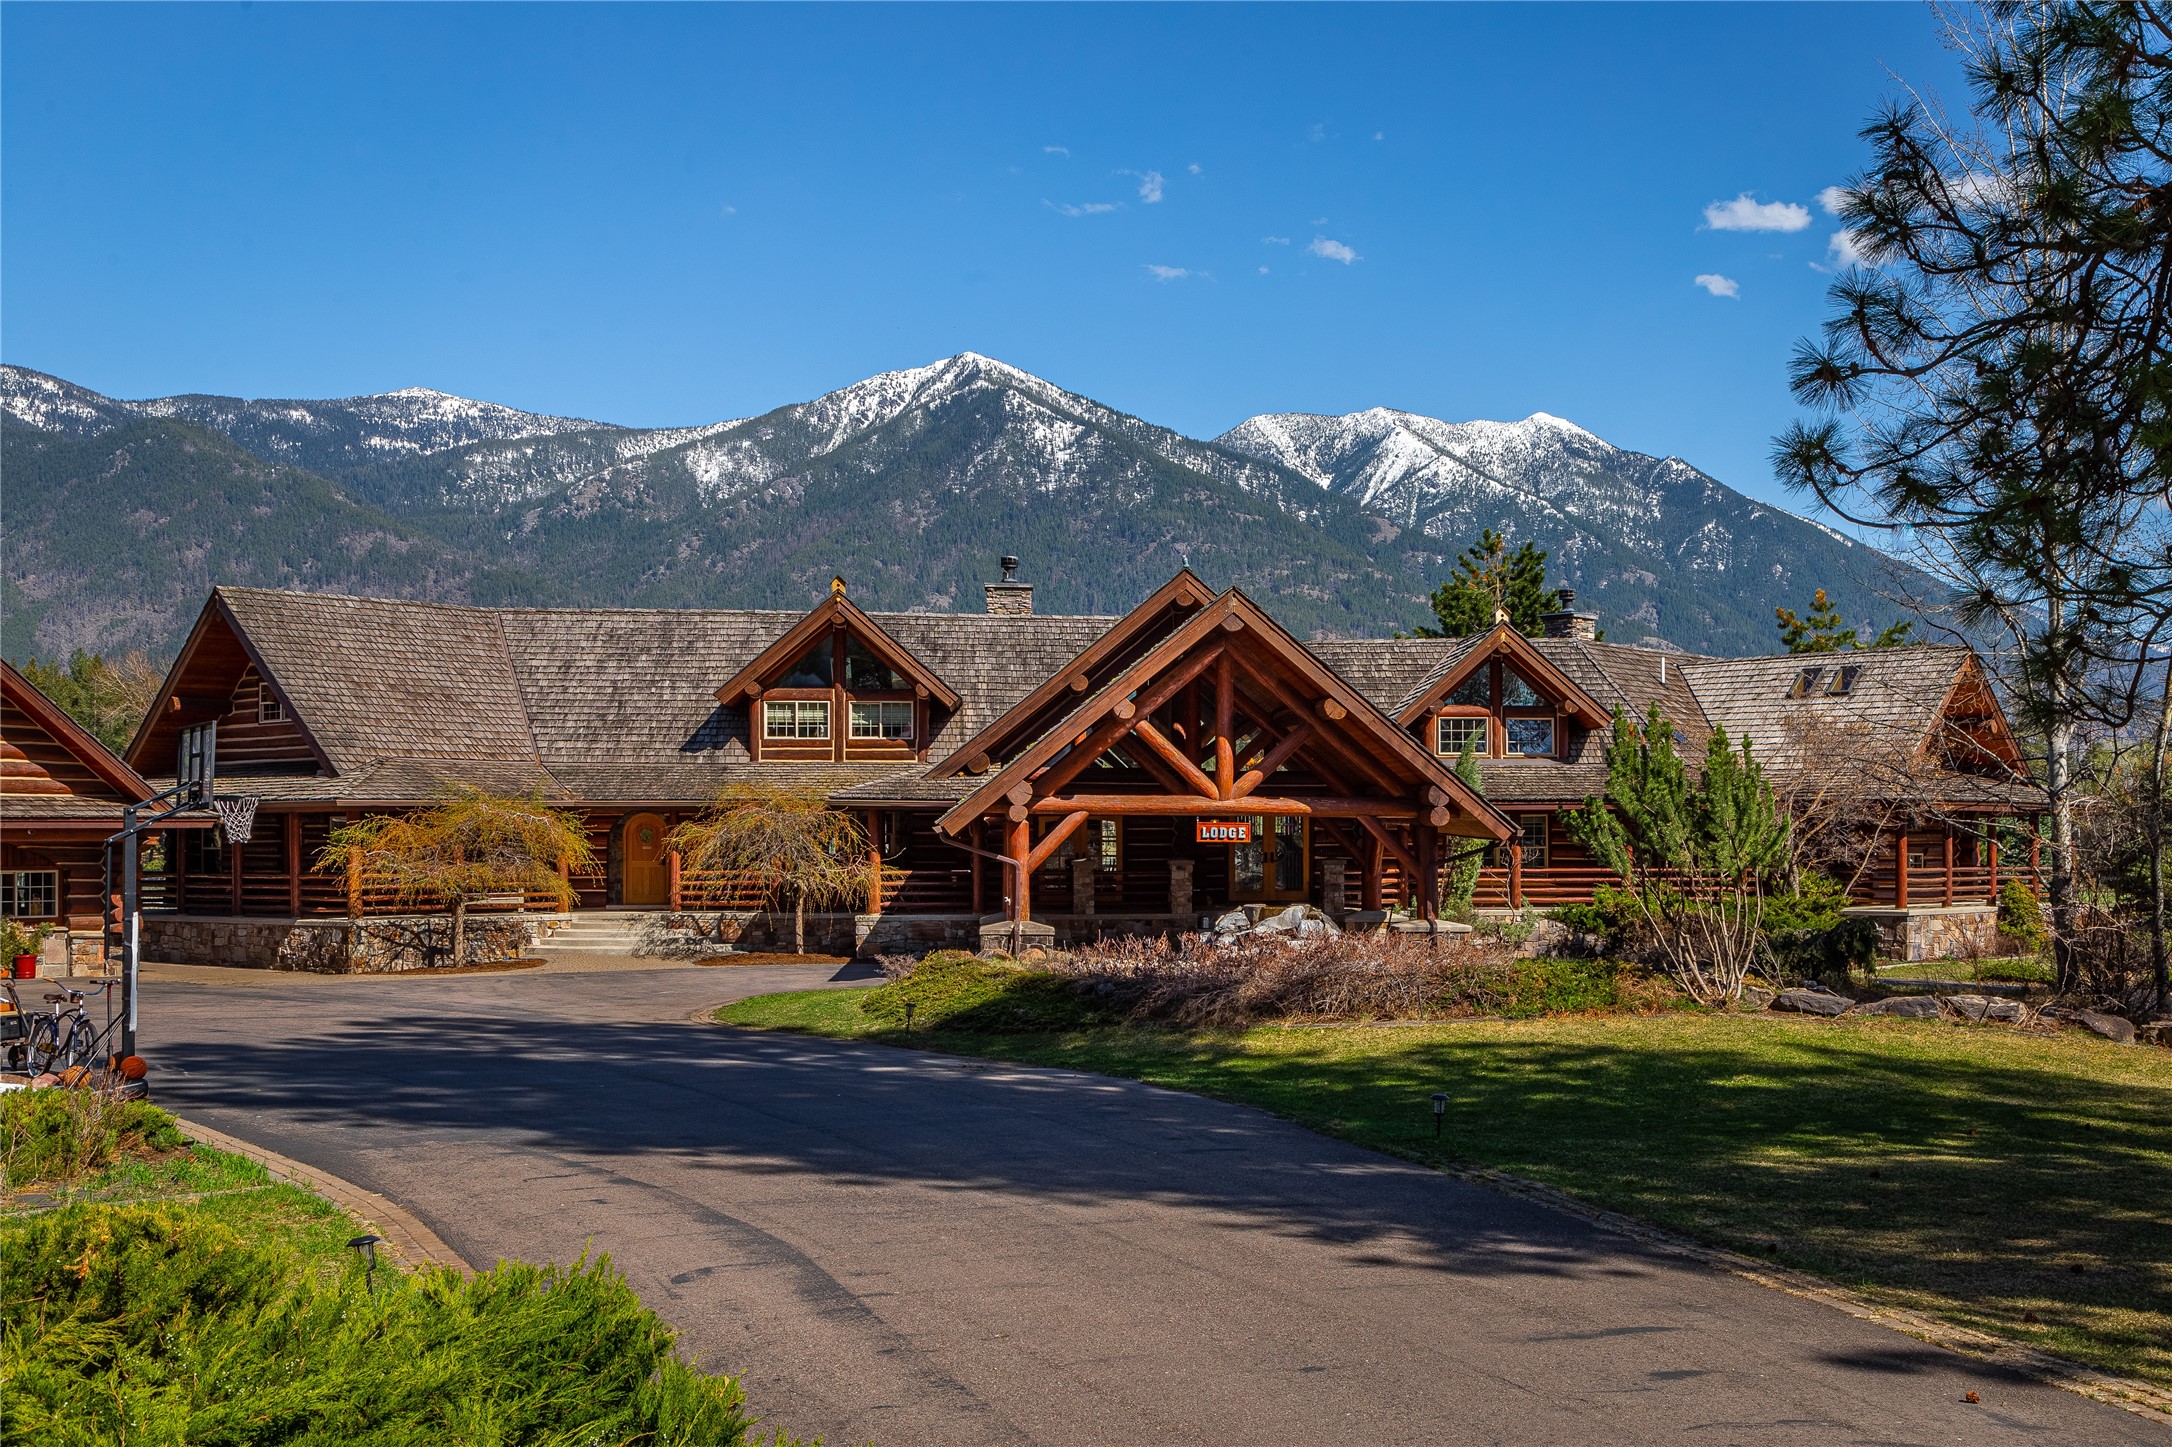 Welcome to Glacier Mountain Ranch in Columbia Falls, Montana.